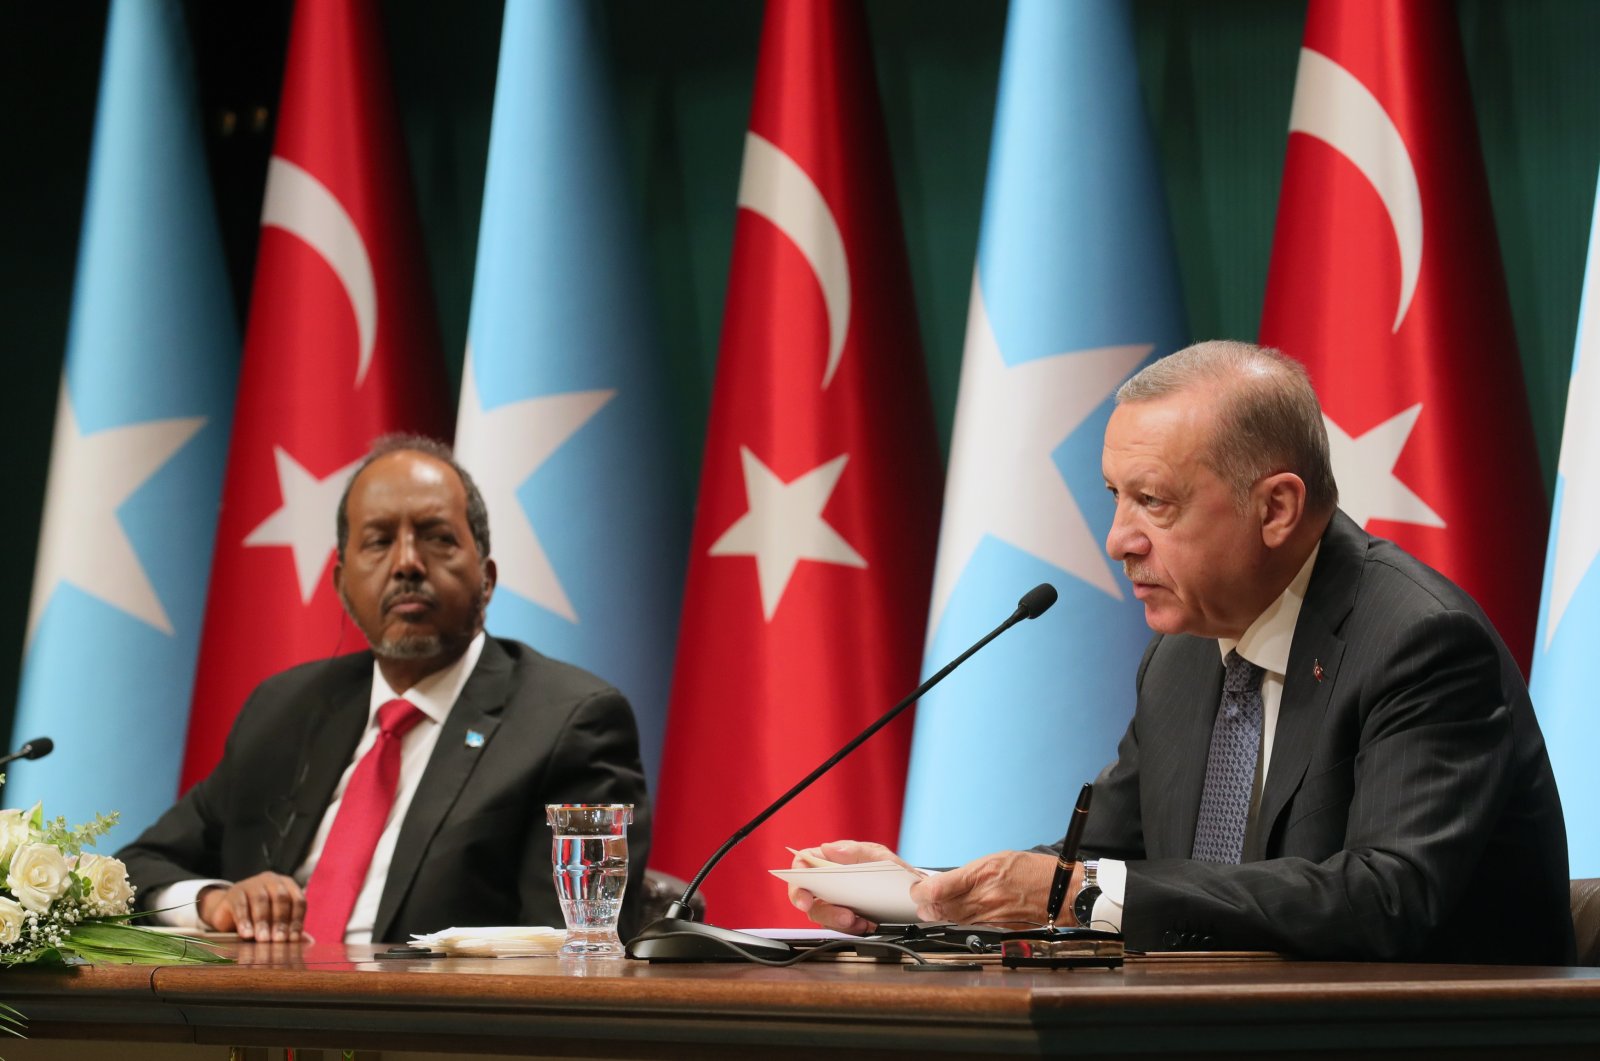 President Recep Tayyip Erdoğan (R) speaks at a joint press conference with his Somali counterpart Hassan Sheikh Mohamud in the capital Ankara, Turkey, July 6, 2022. (AA Photo)